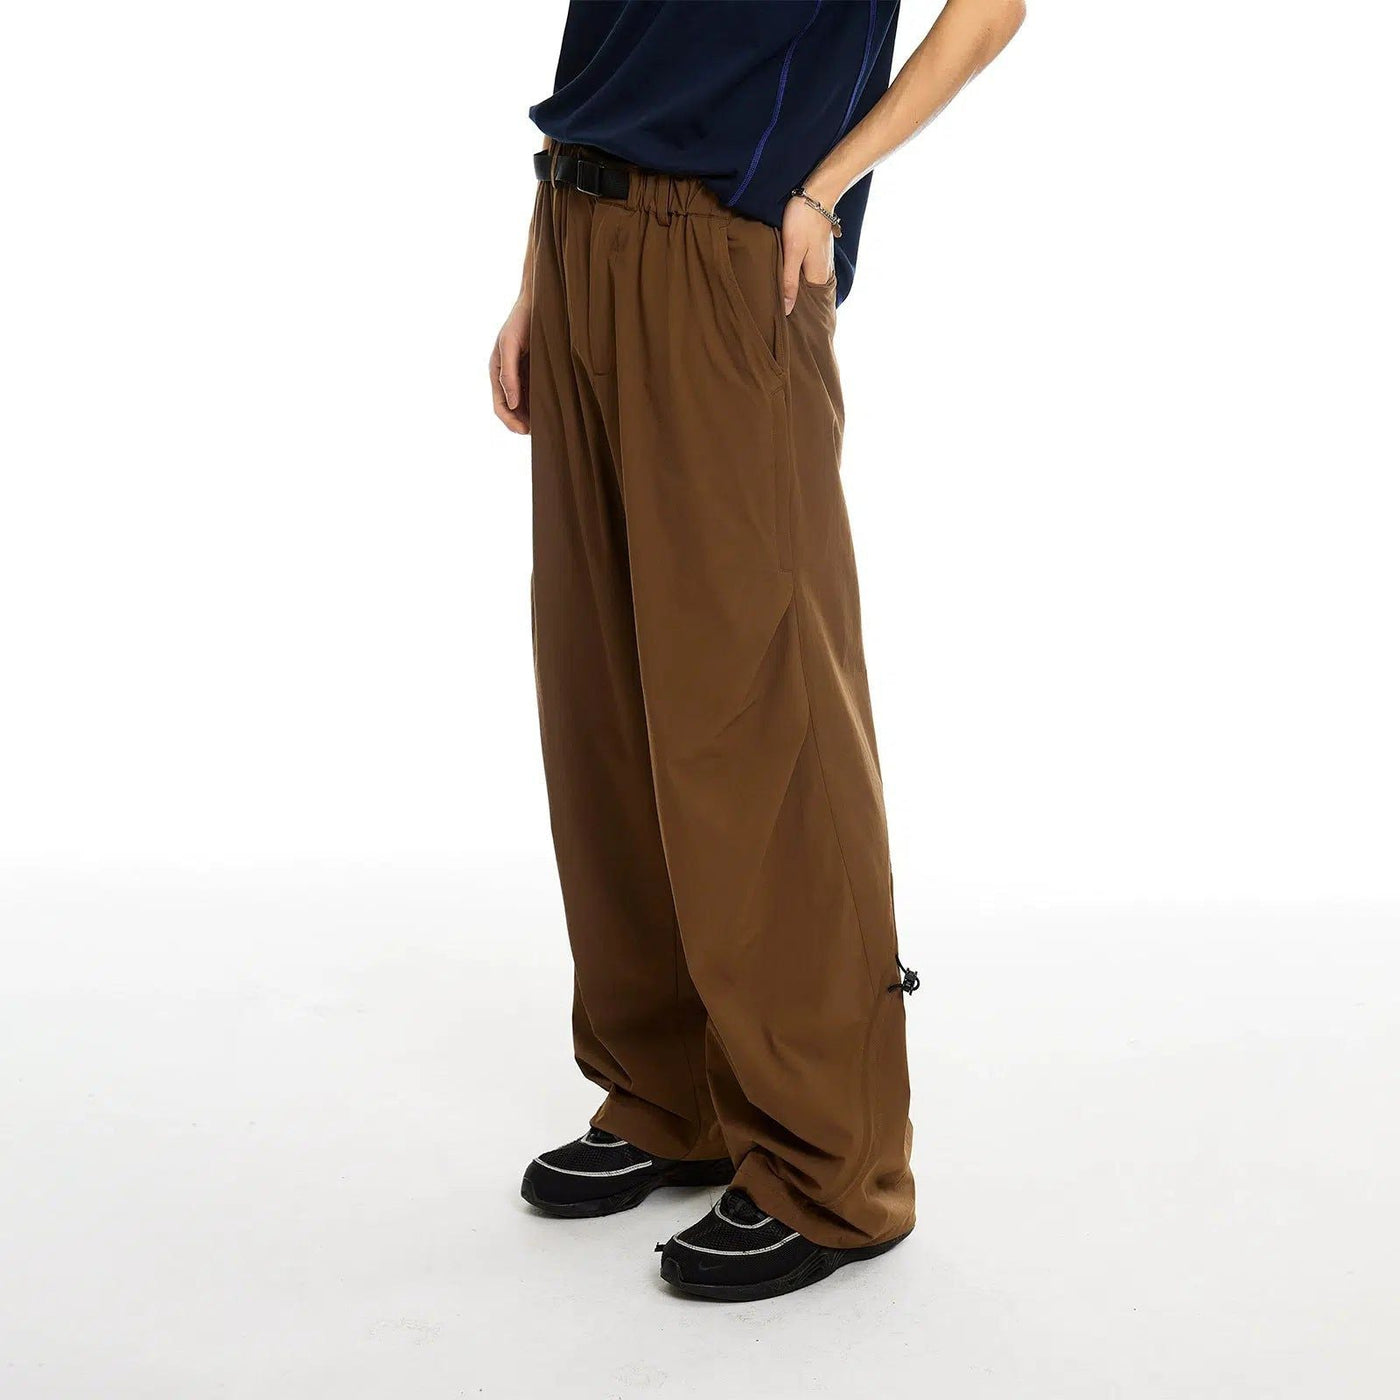 Quick Dry Drapey Track Pants Korean Street Fashion Pants By Roaring Wild Shop Online at OH Vault